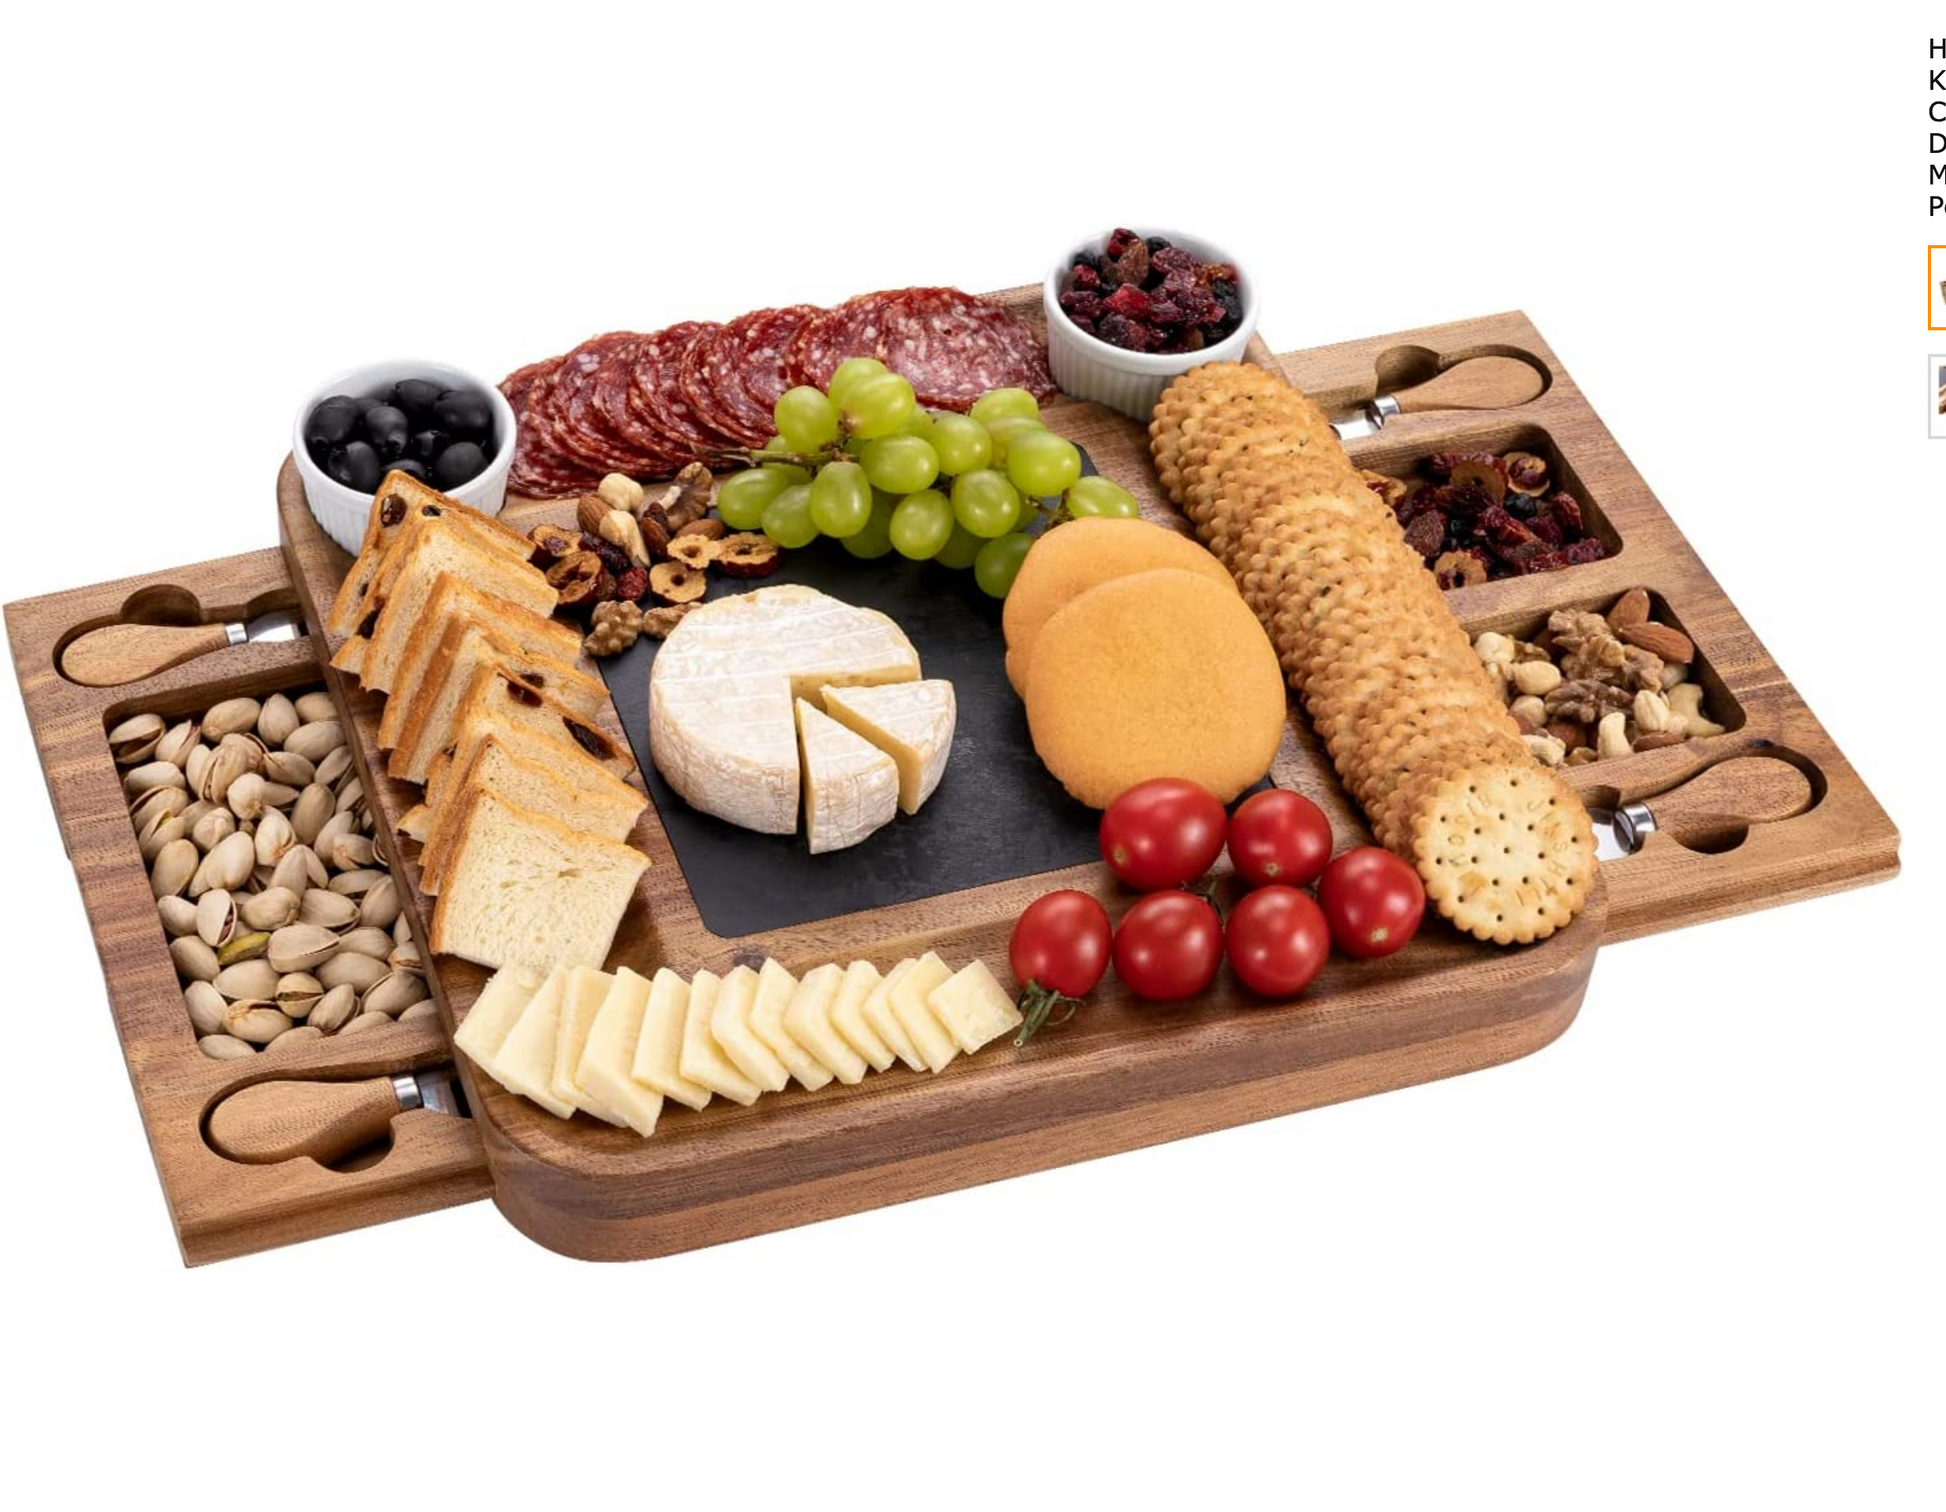 The Best Charcuterie Wood Board and Platter to Serve Cheese and